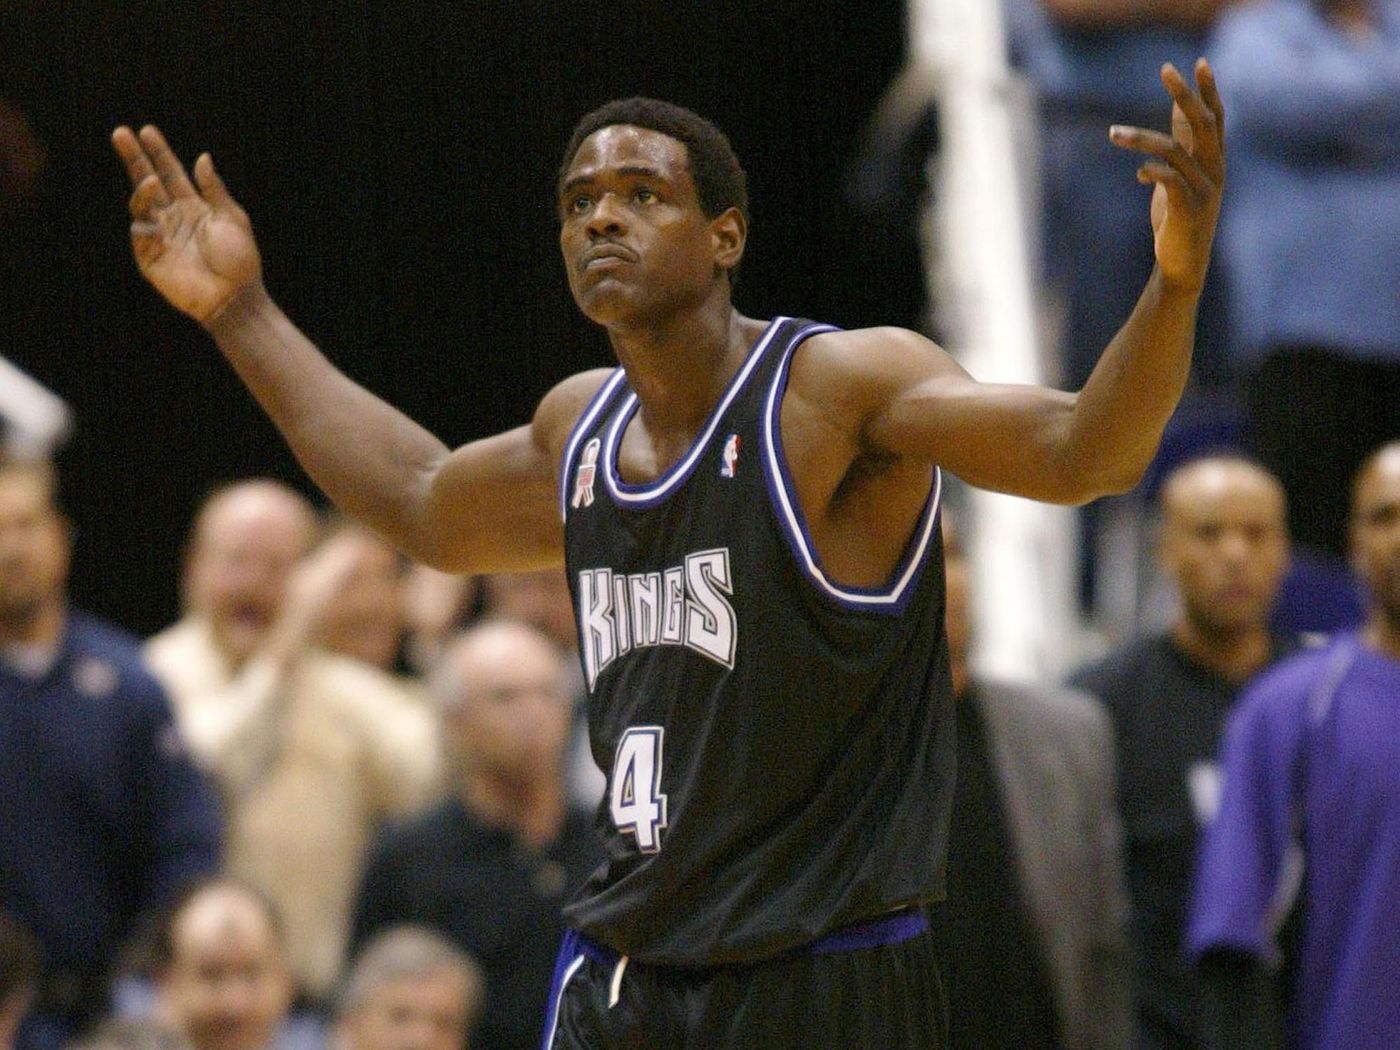 Sacramento Kings: Will Chris Webber get into the Hall of Fame?